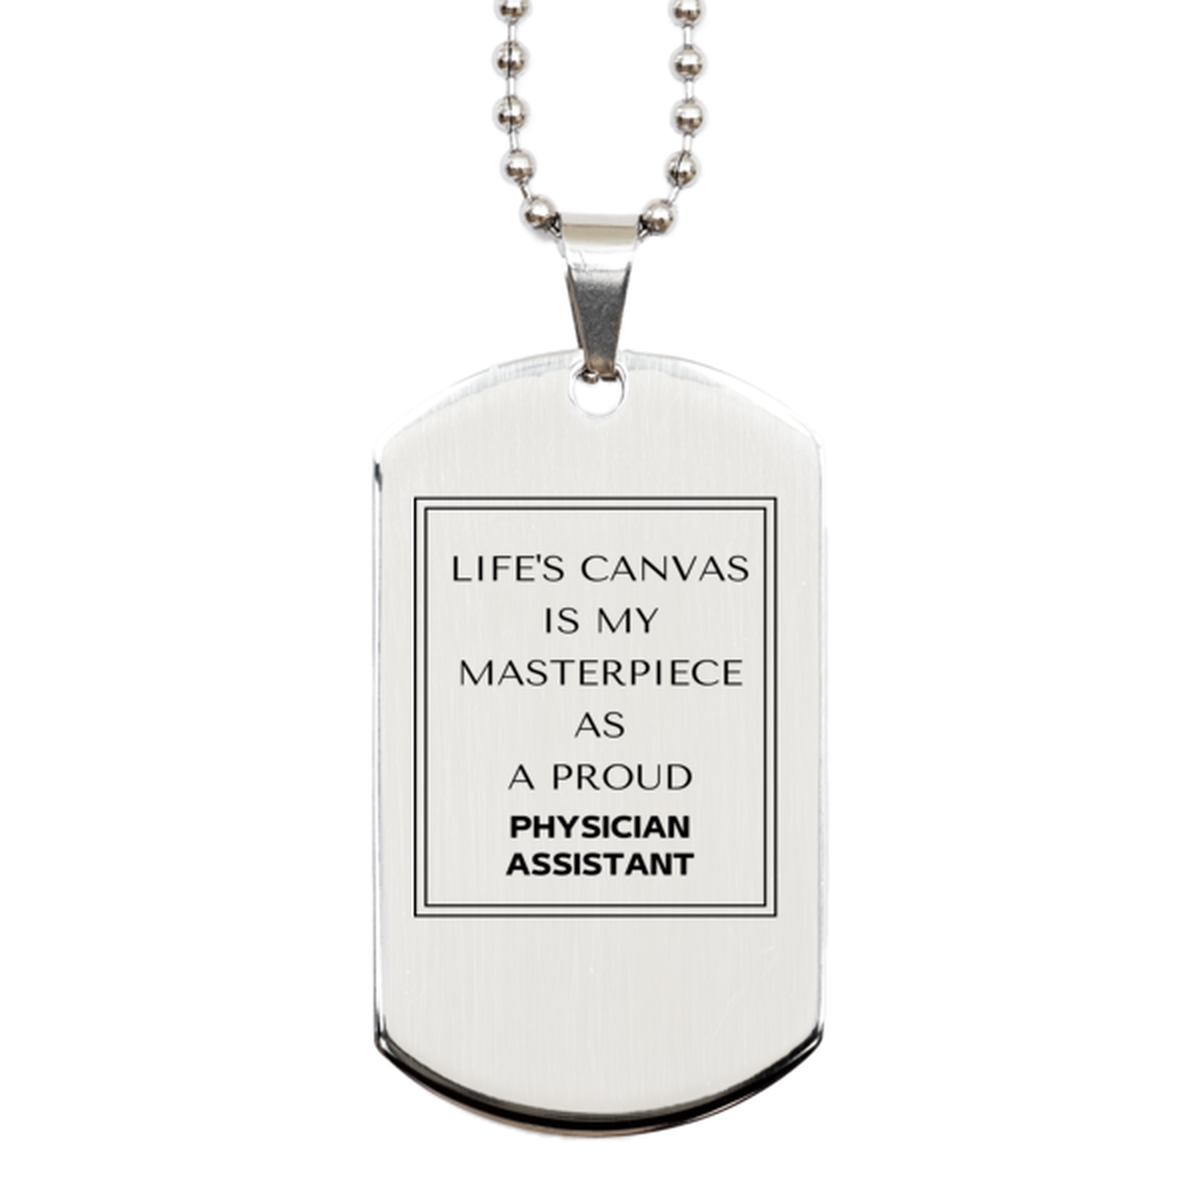 Proud Physician Assistant Gifts, Life's canvas is my masterpiece, Epic Birthday Christmas Unique Silver Dog Tag For Physician Assistant, Coworkers, Men, Women, Friends